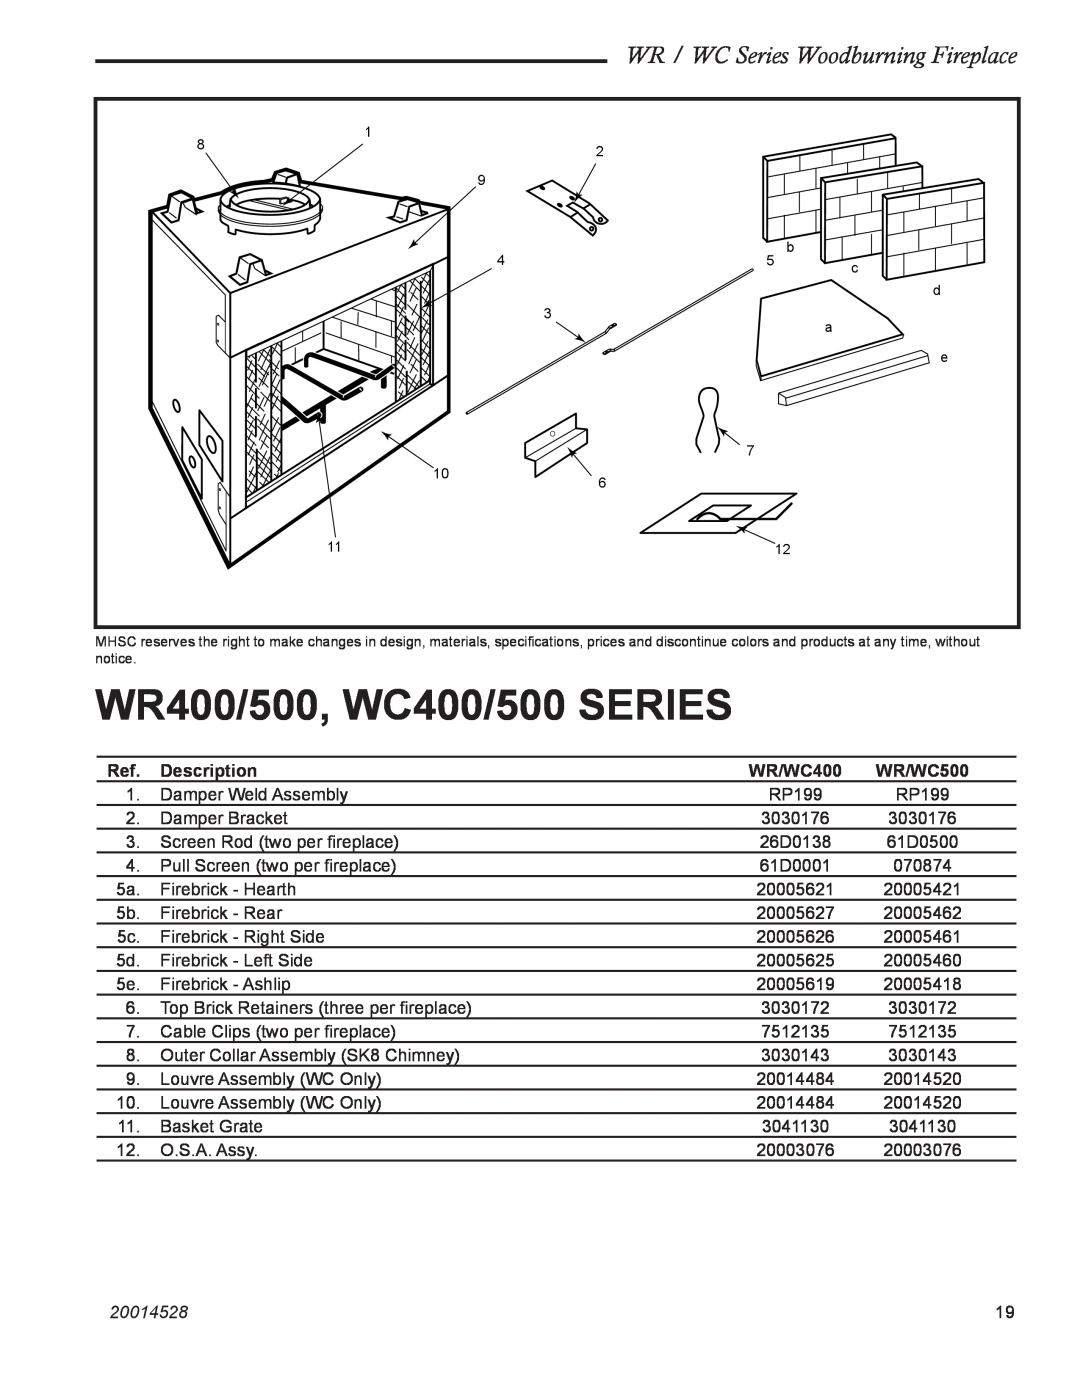 Monessen Hearth WR400/500, WC400/500 SERIES, WR / WC Series Woodburning Fireplace, Description, WR/WC400, WR/WC500 